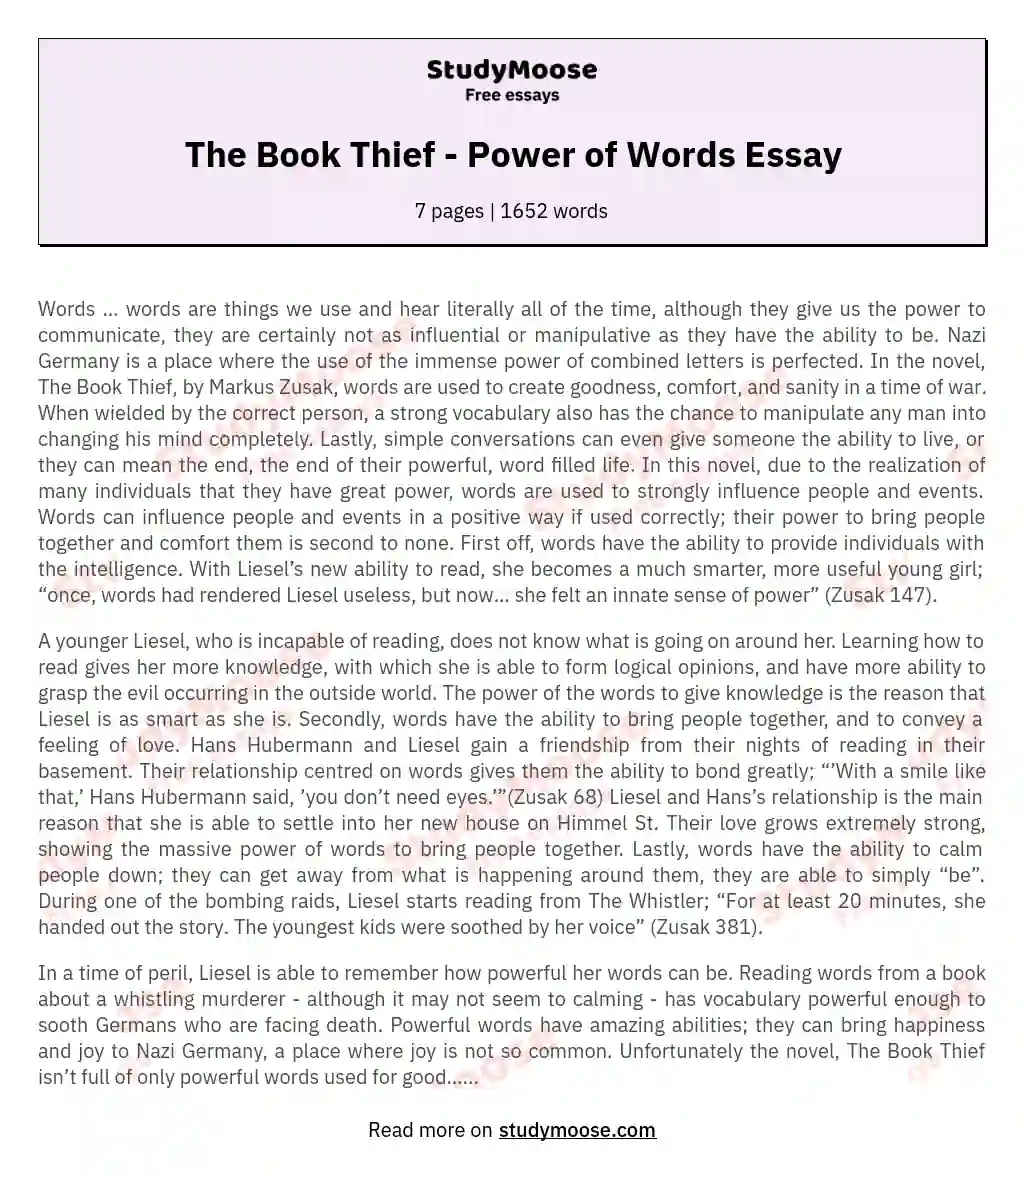 The Book Thief - Power of Words Essay